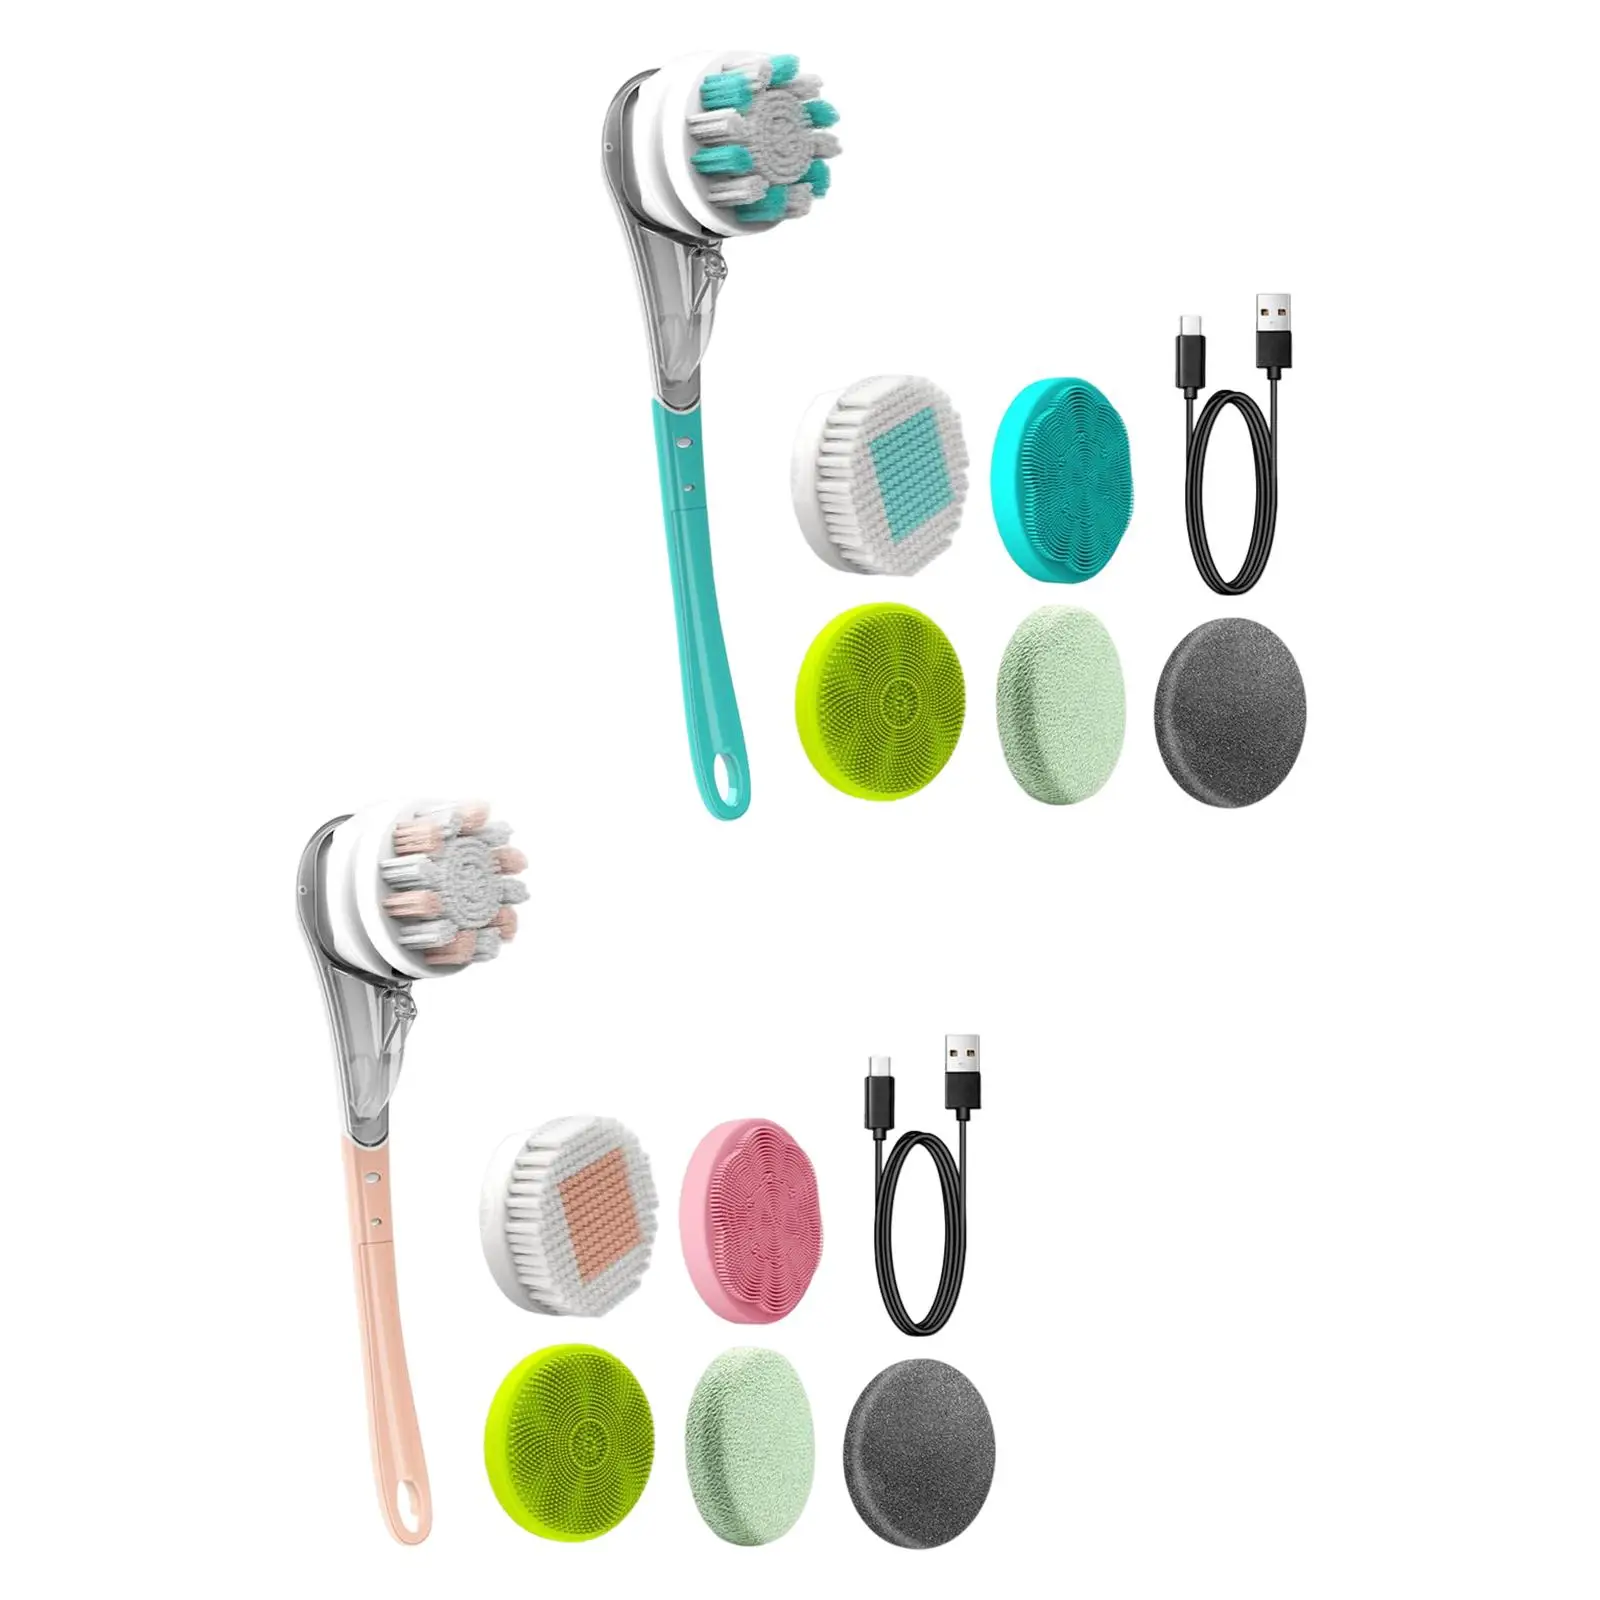 Electric Body Brush Scrubber Waterproof Rechargeable Spinning Skin Brush for Showering